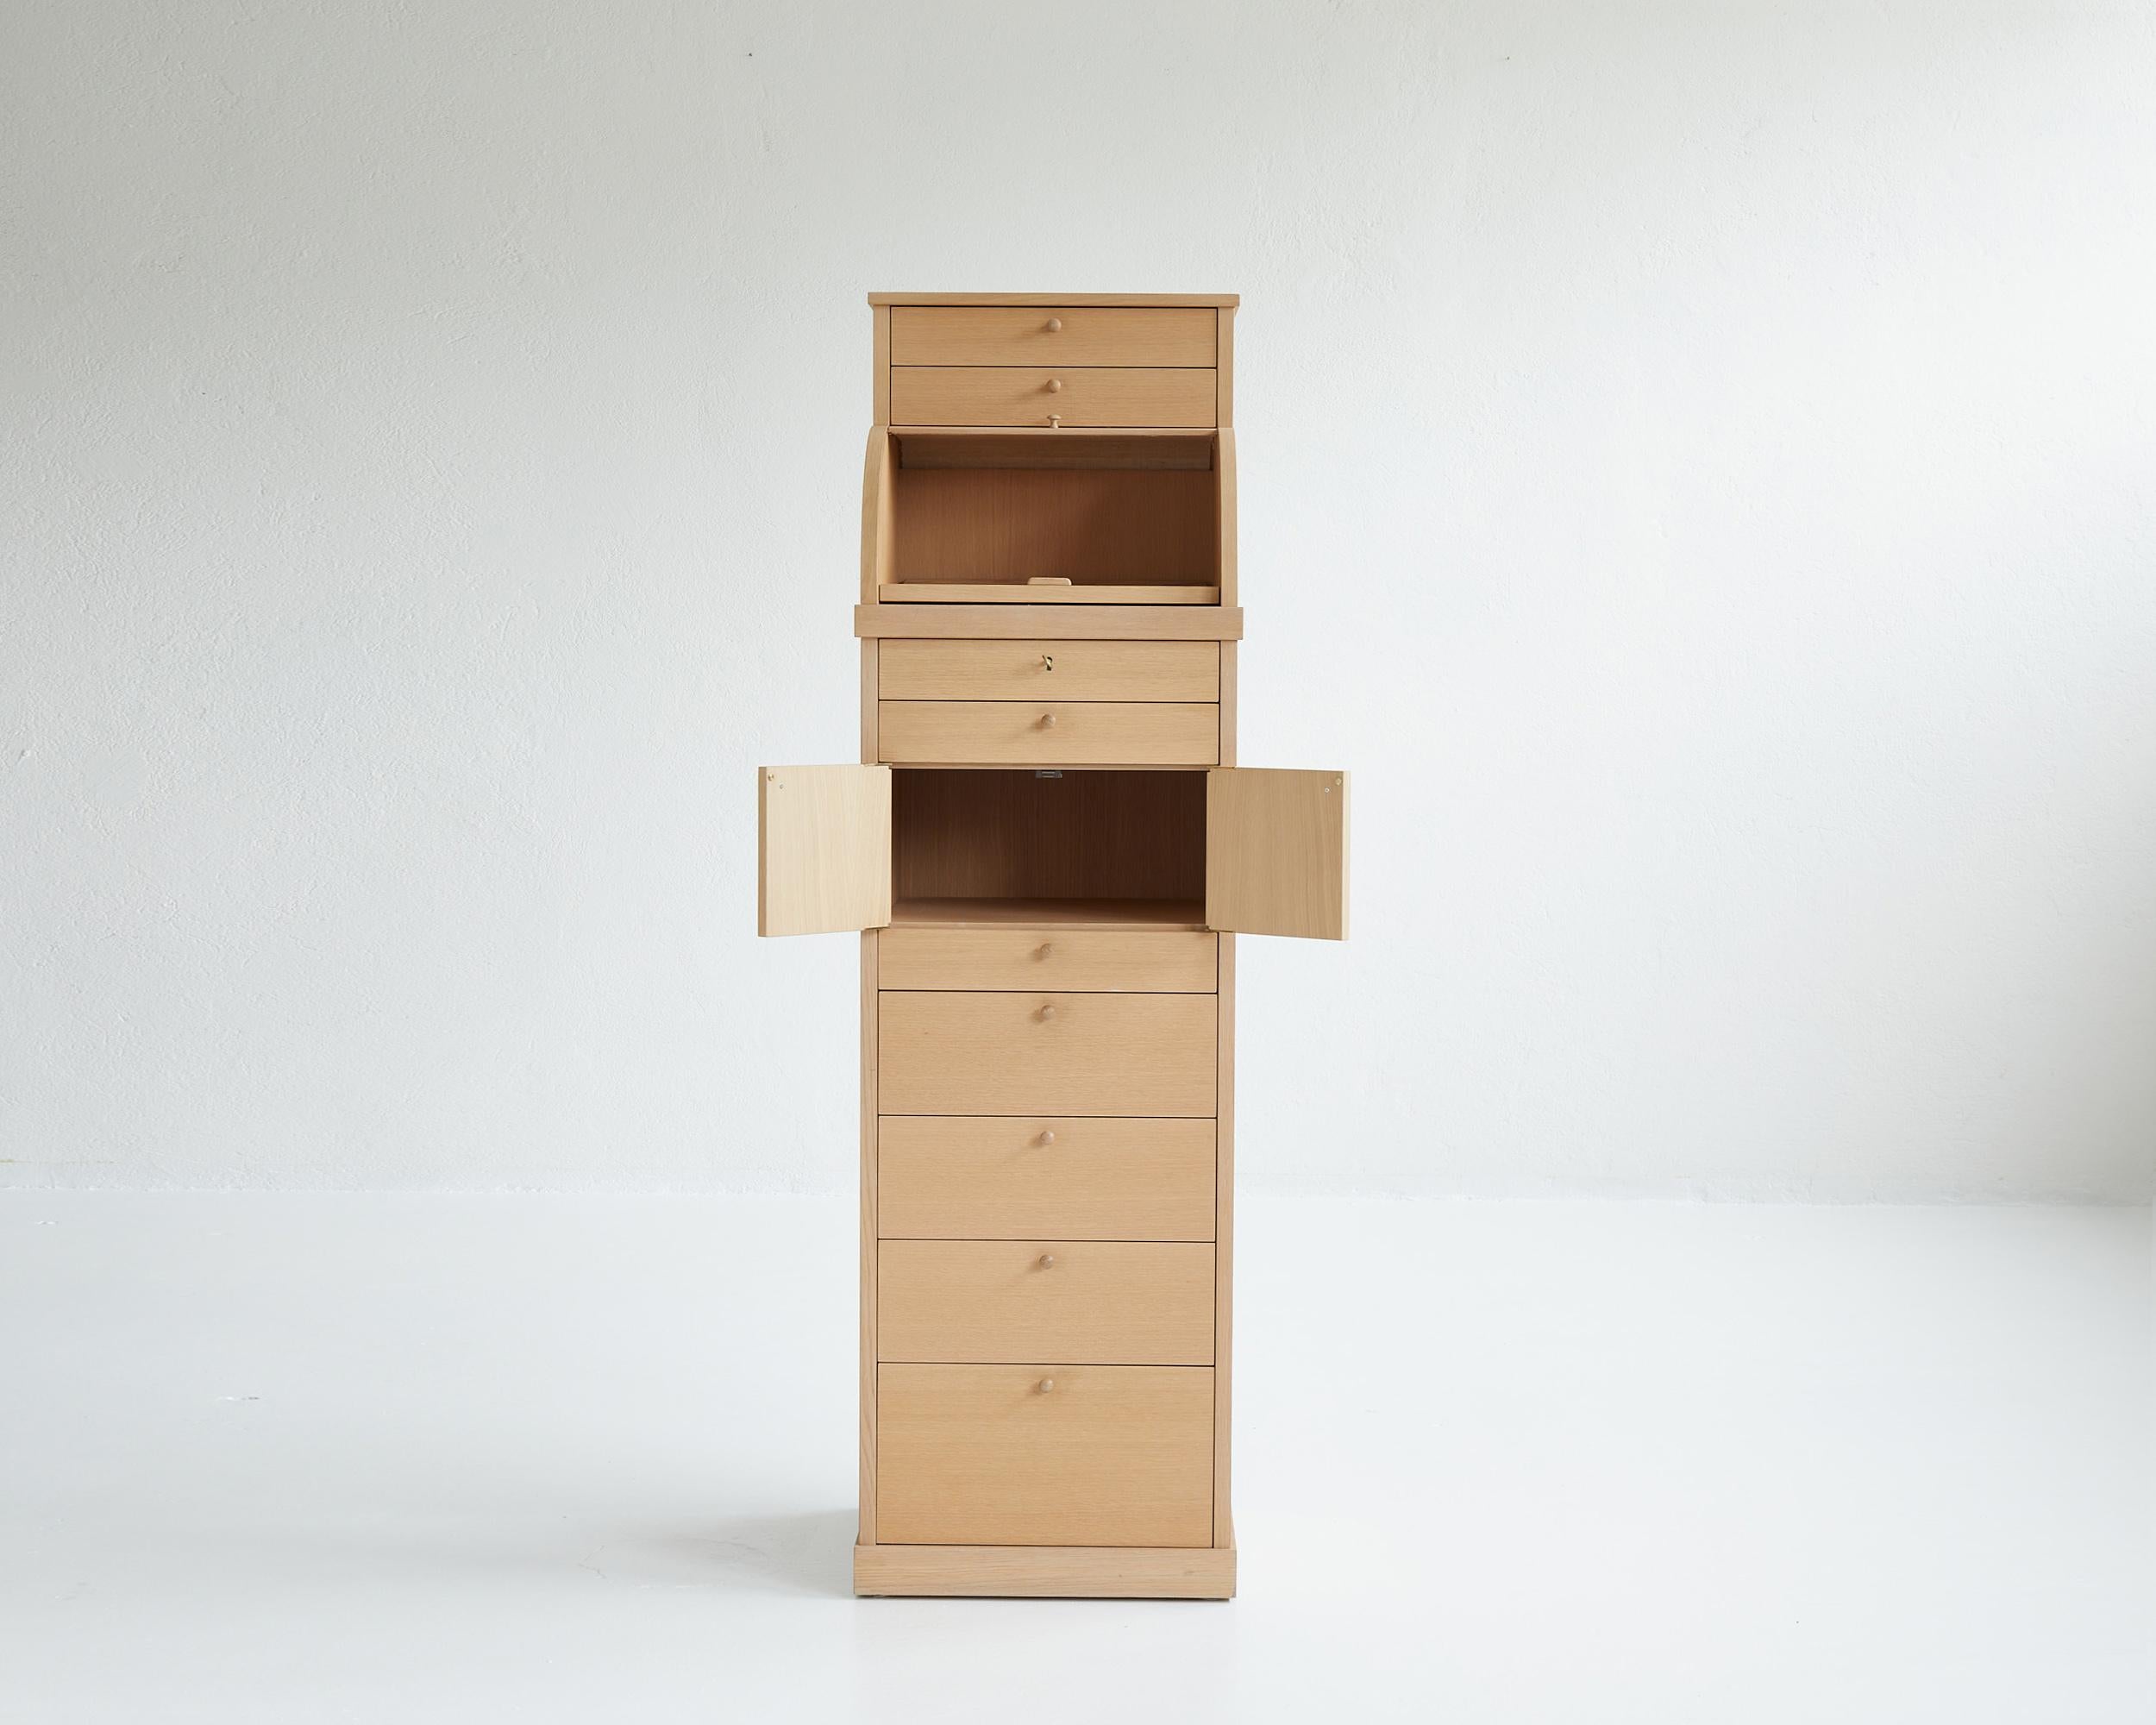 Iconic high drawer cabinet designed by Italian architect and designer Aldo Rossi for Edizioni Molteni in 1987.

The cabinet is composed of a roll top hiding a writing desk that can be pulled out as well as numerous drawers and spaces to classify,